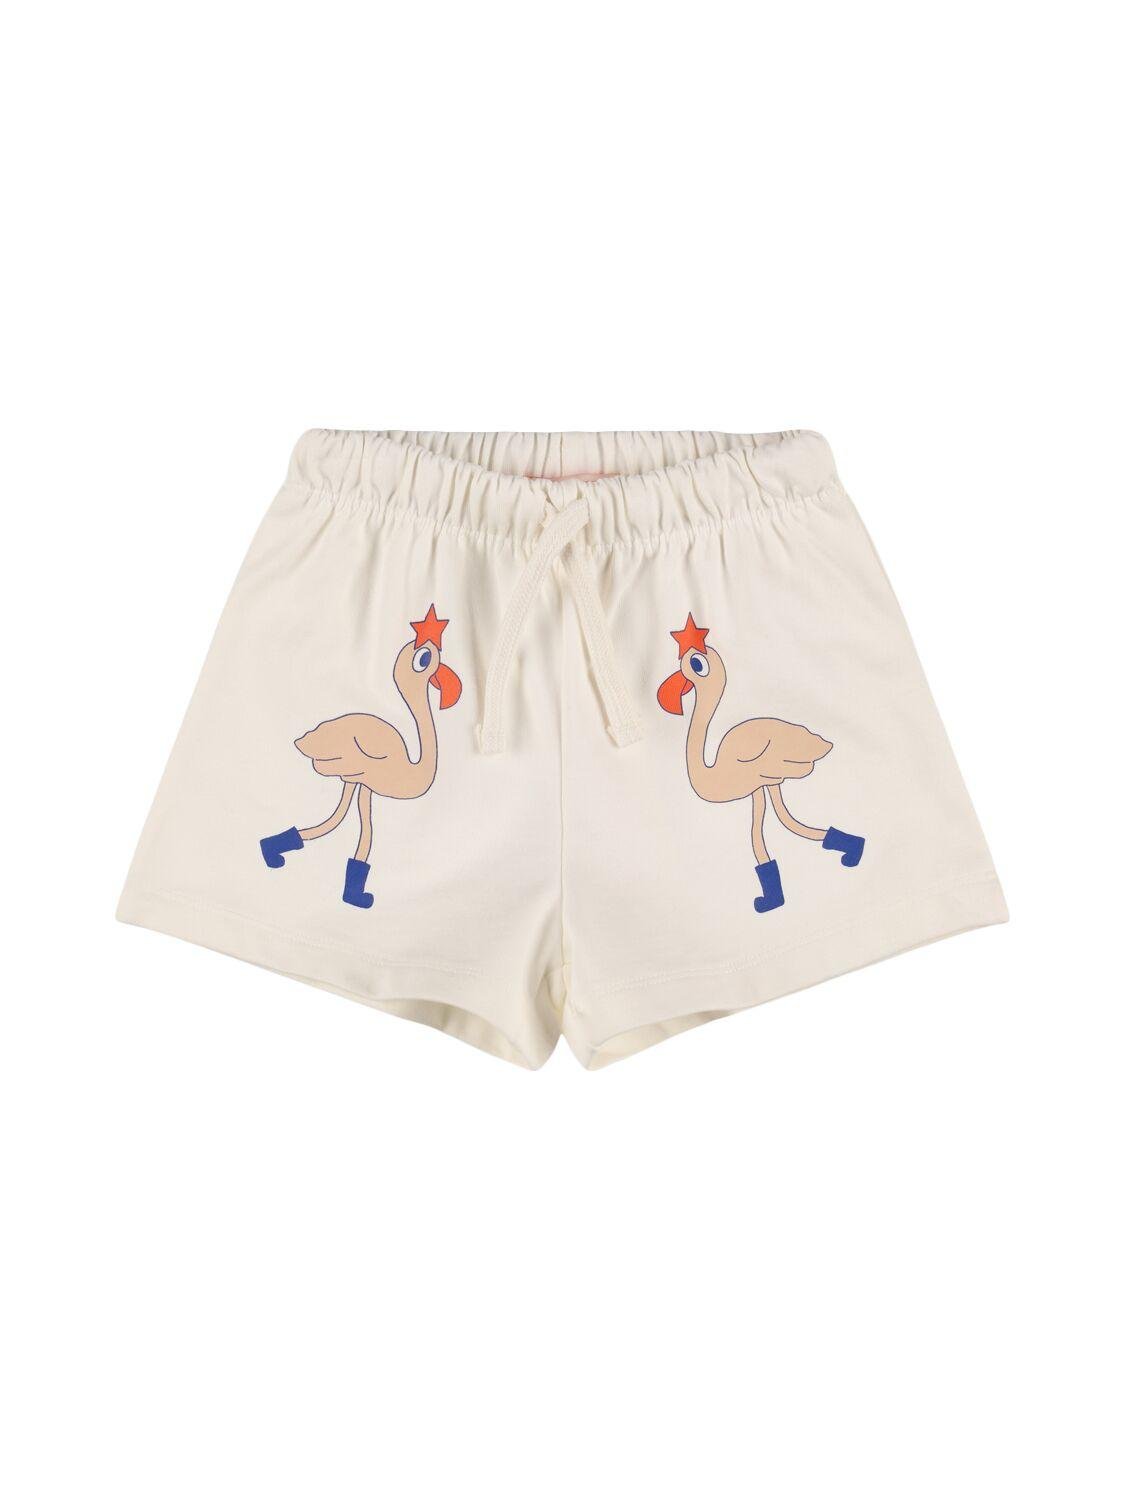 Printed Organic Cotton Shorts by TINY COTTONS